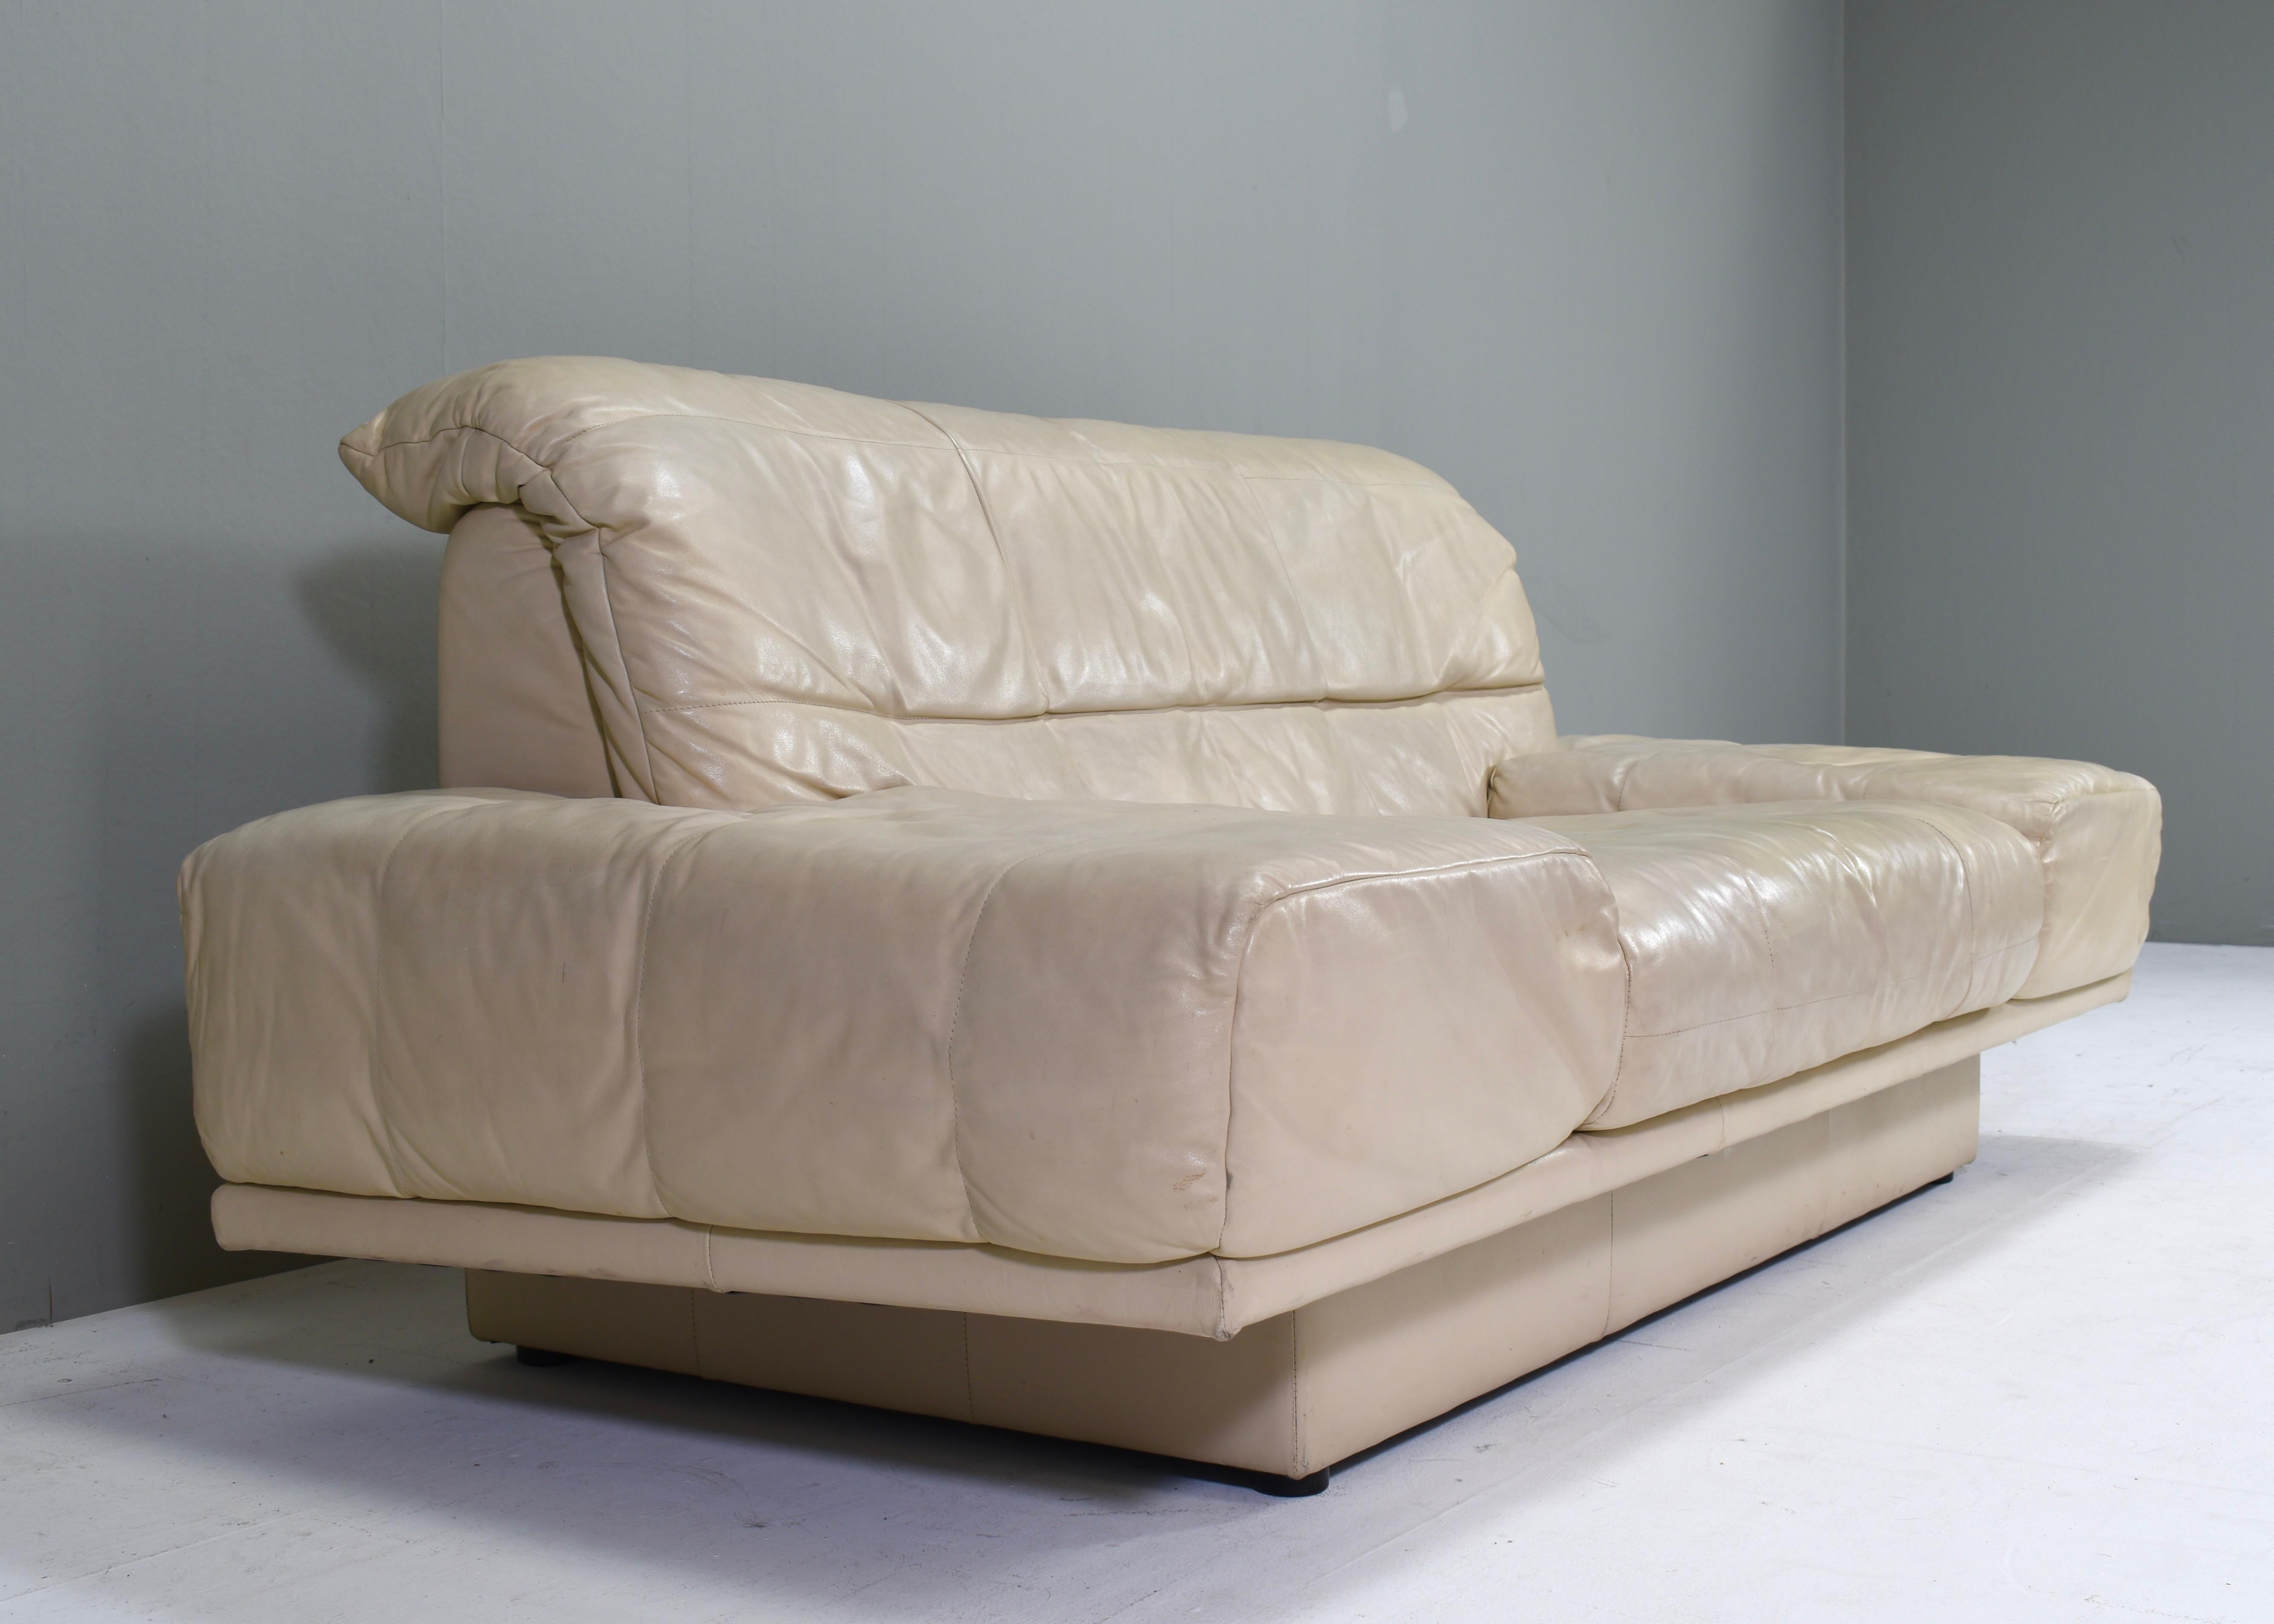 Rolf Benz 2-seat sofa in Ivory Cream White Leather – Germany, circa 1980-1990 For Sale 2